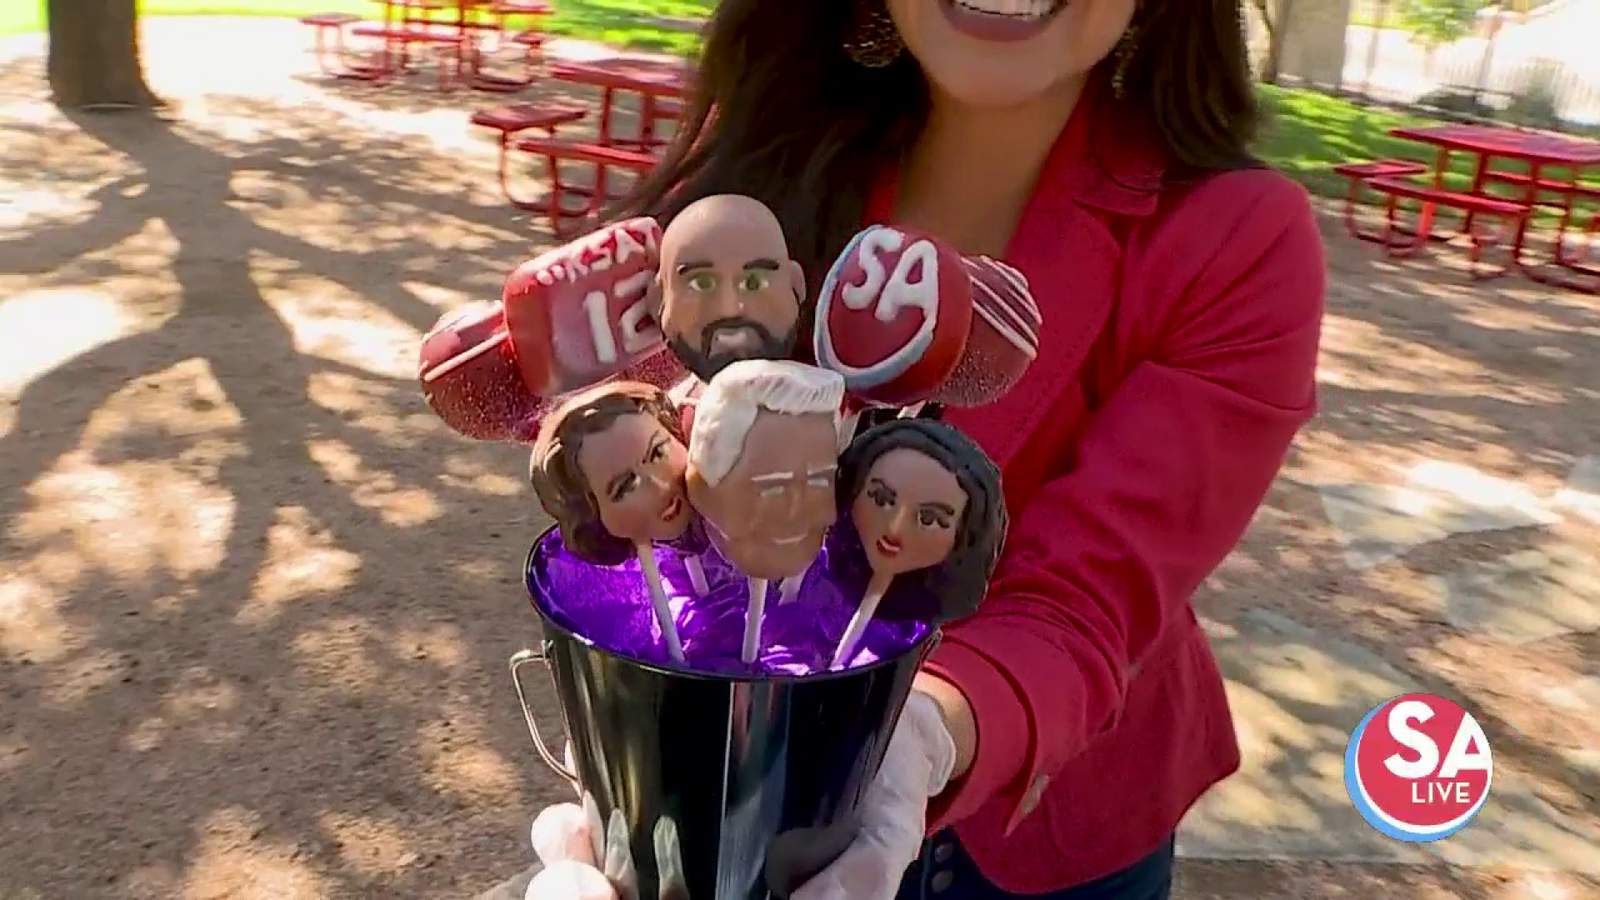 Local dad turns cake pop business into ‘face pop’ works of art